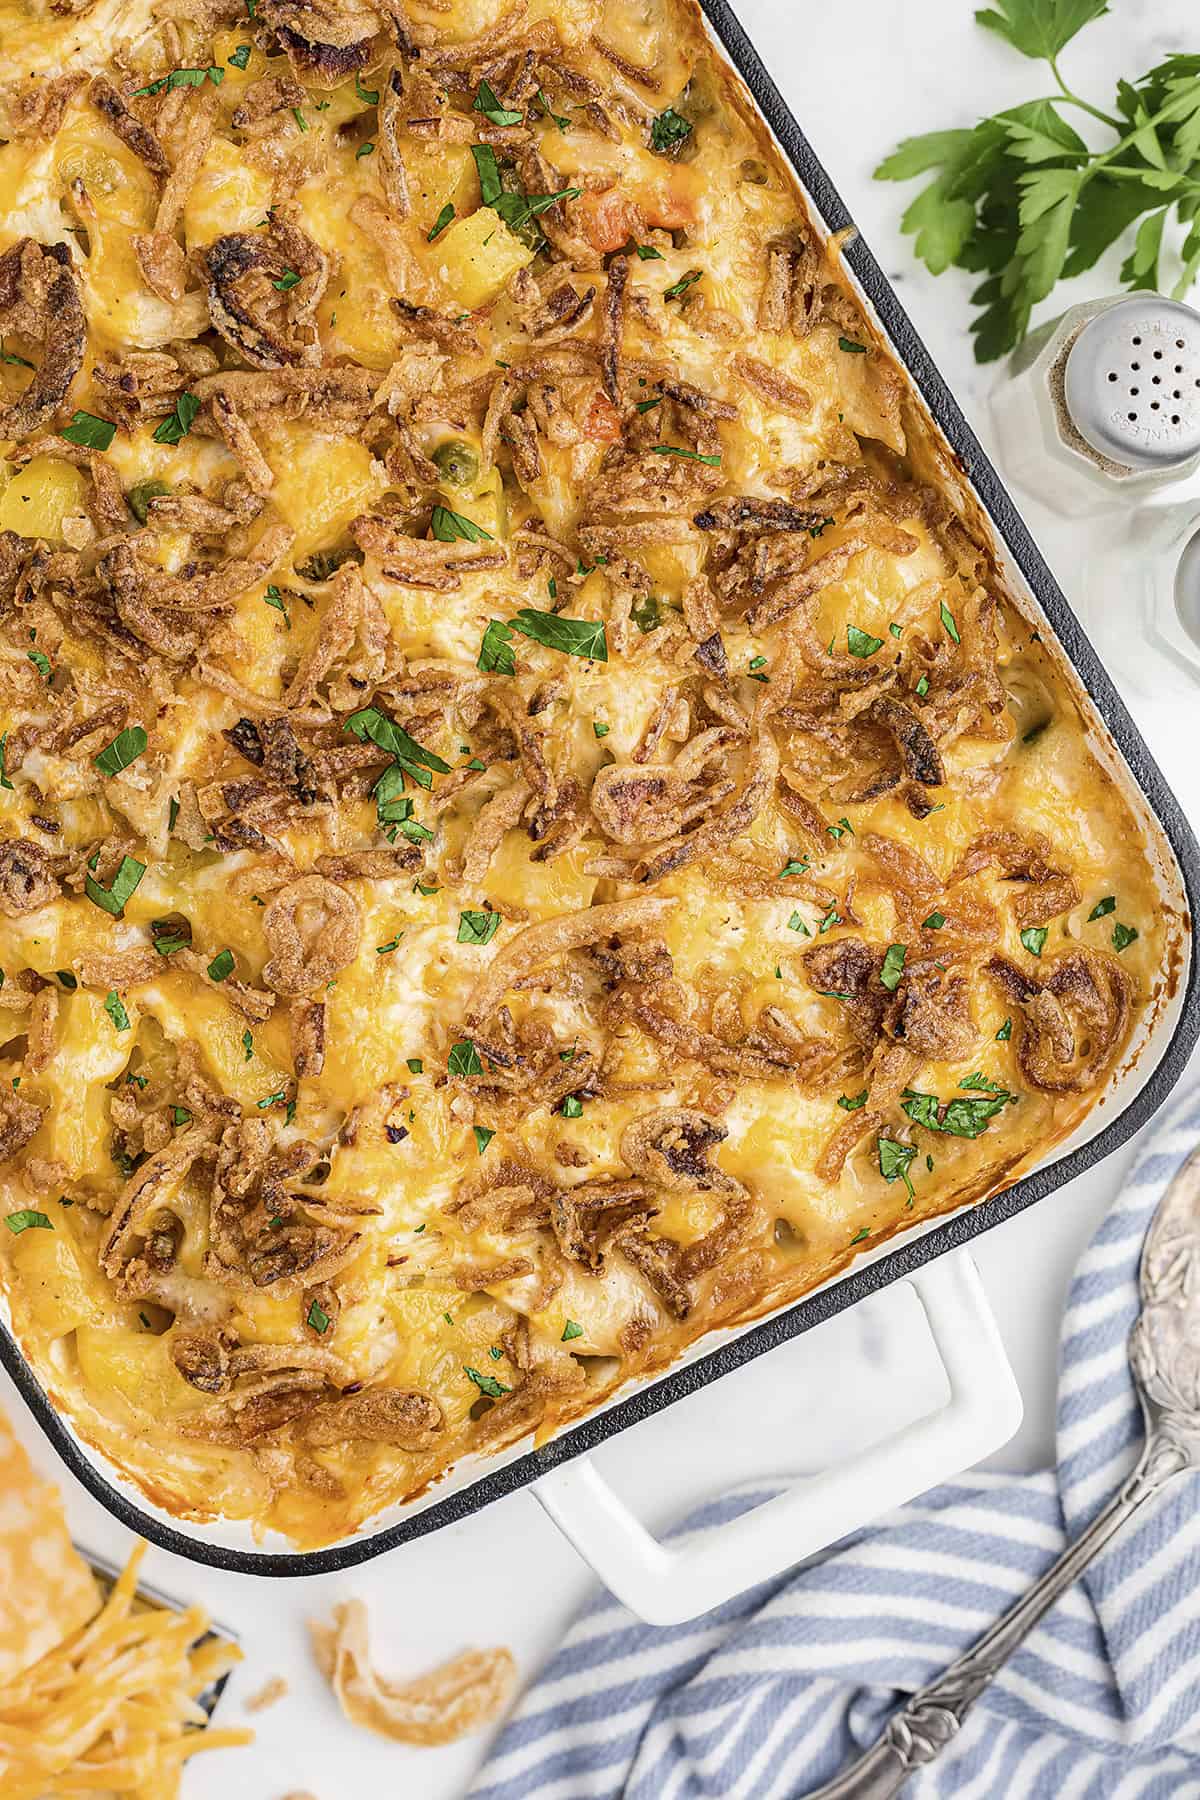 Overhead view of chicken and potato casserole in white baking dish.